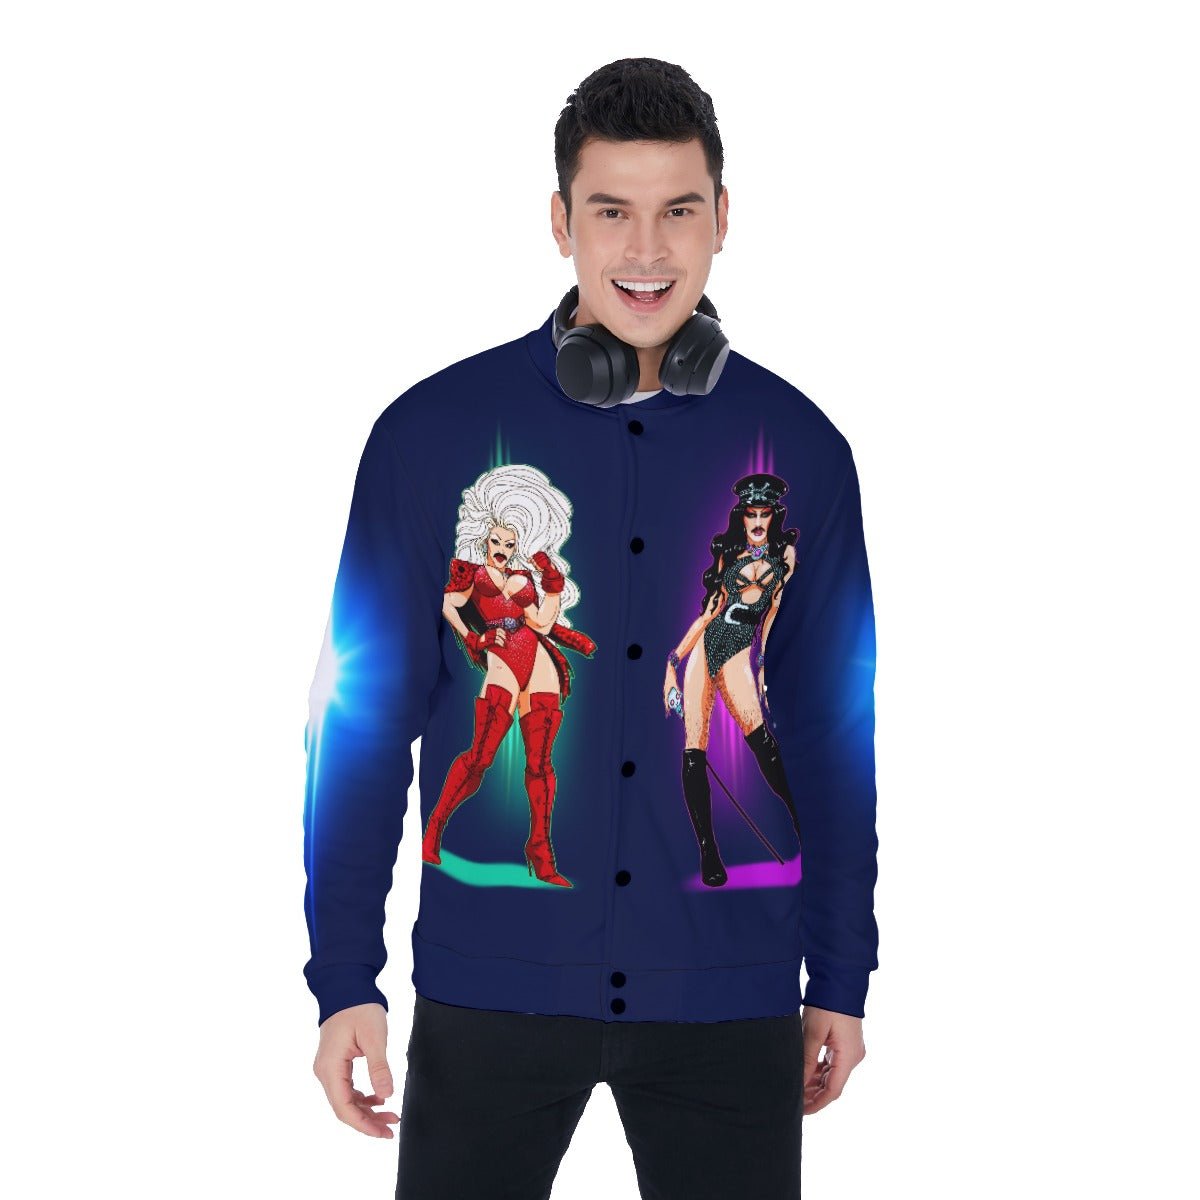 Biqtch Puddin - Choose Your Fighter - Baseball Jacket - dragqueenmerch